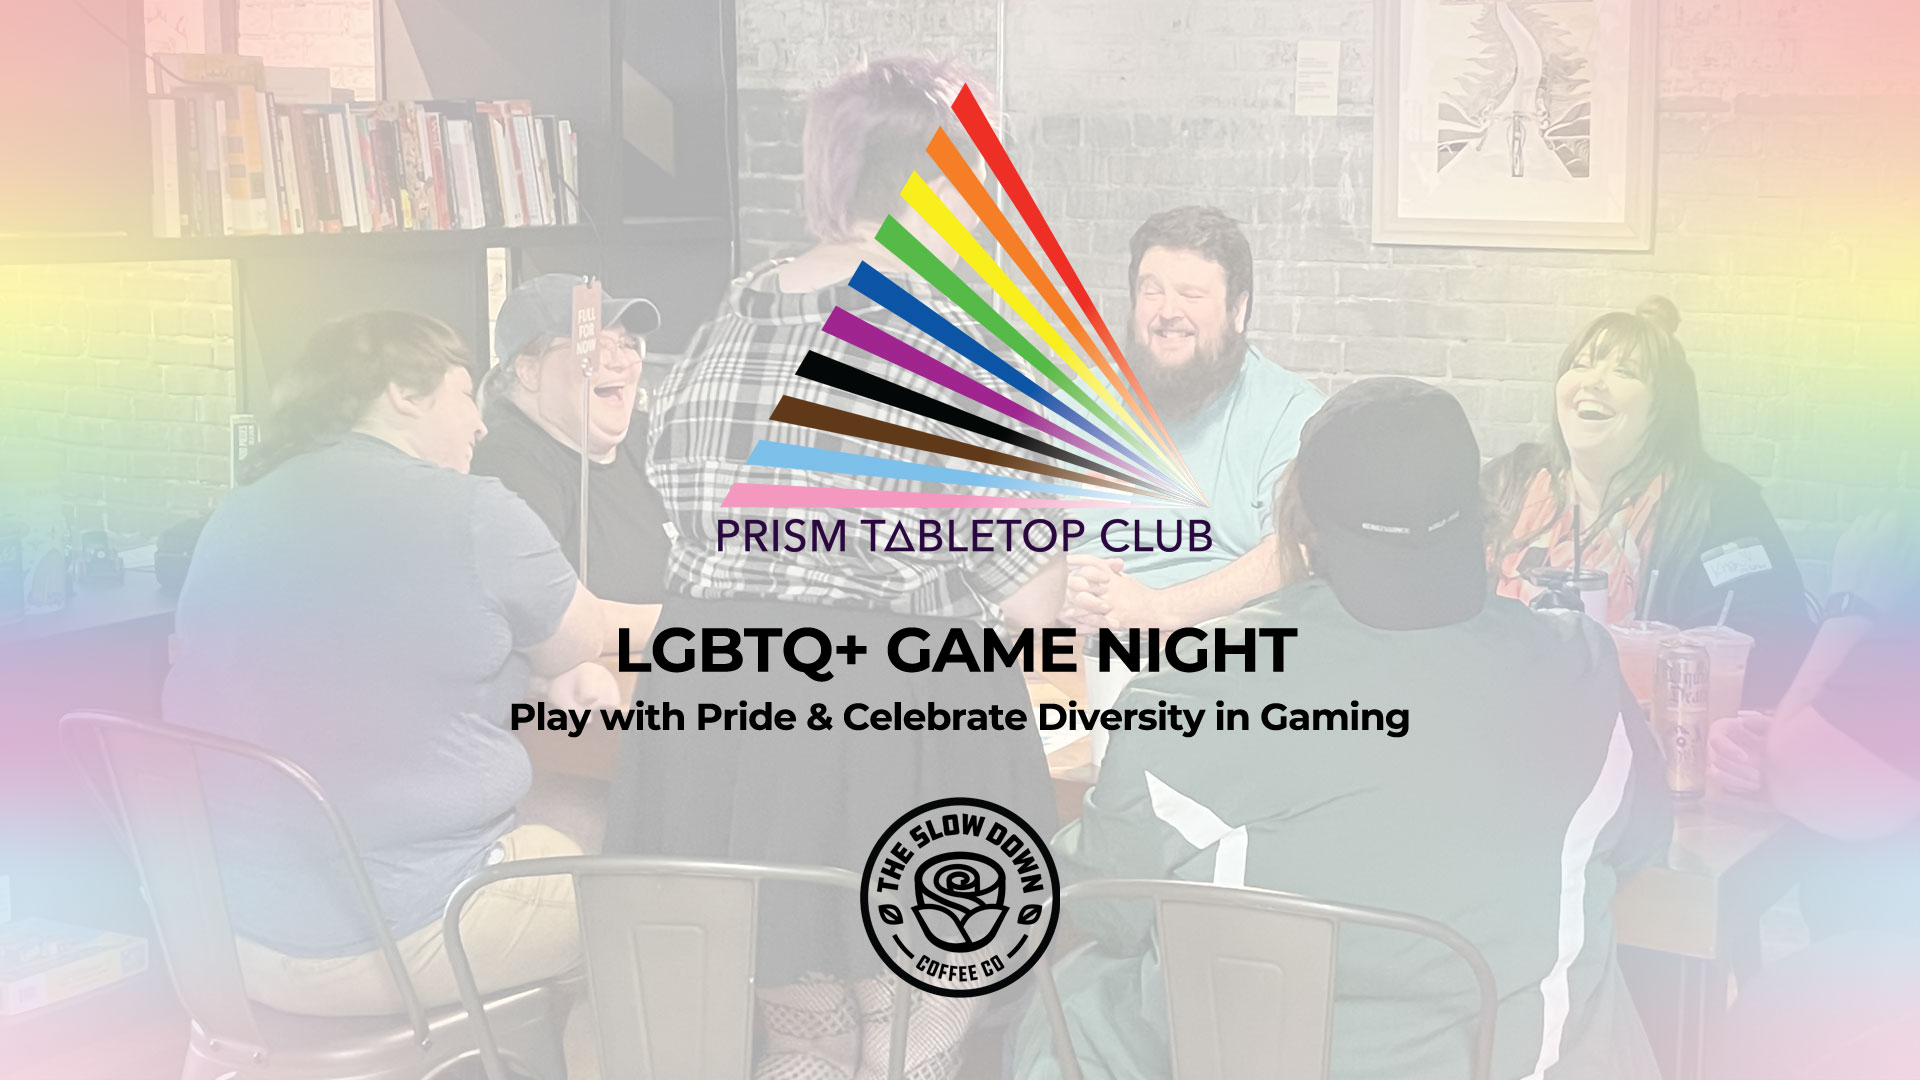 Prism Tabletop Club LGBTQ+ Board Game Night with The Rook Room and The Slow Down Event Image